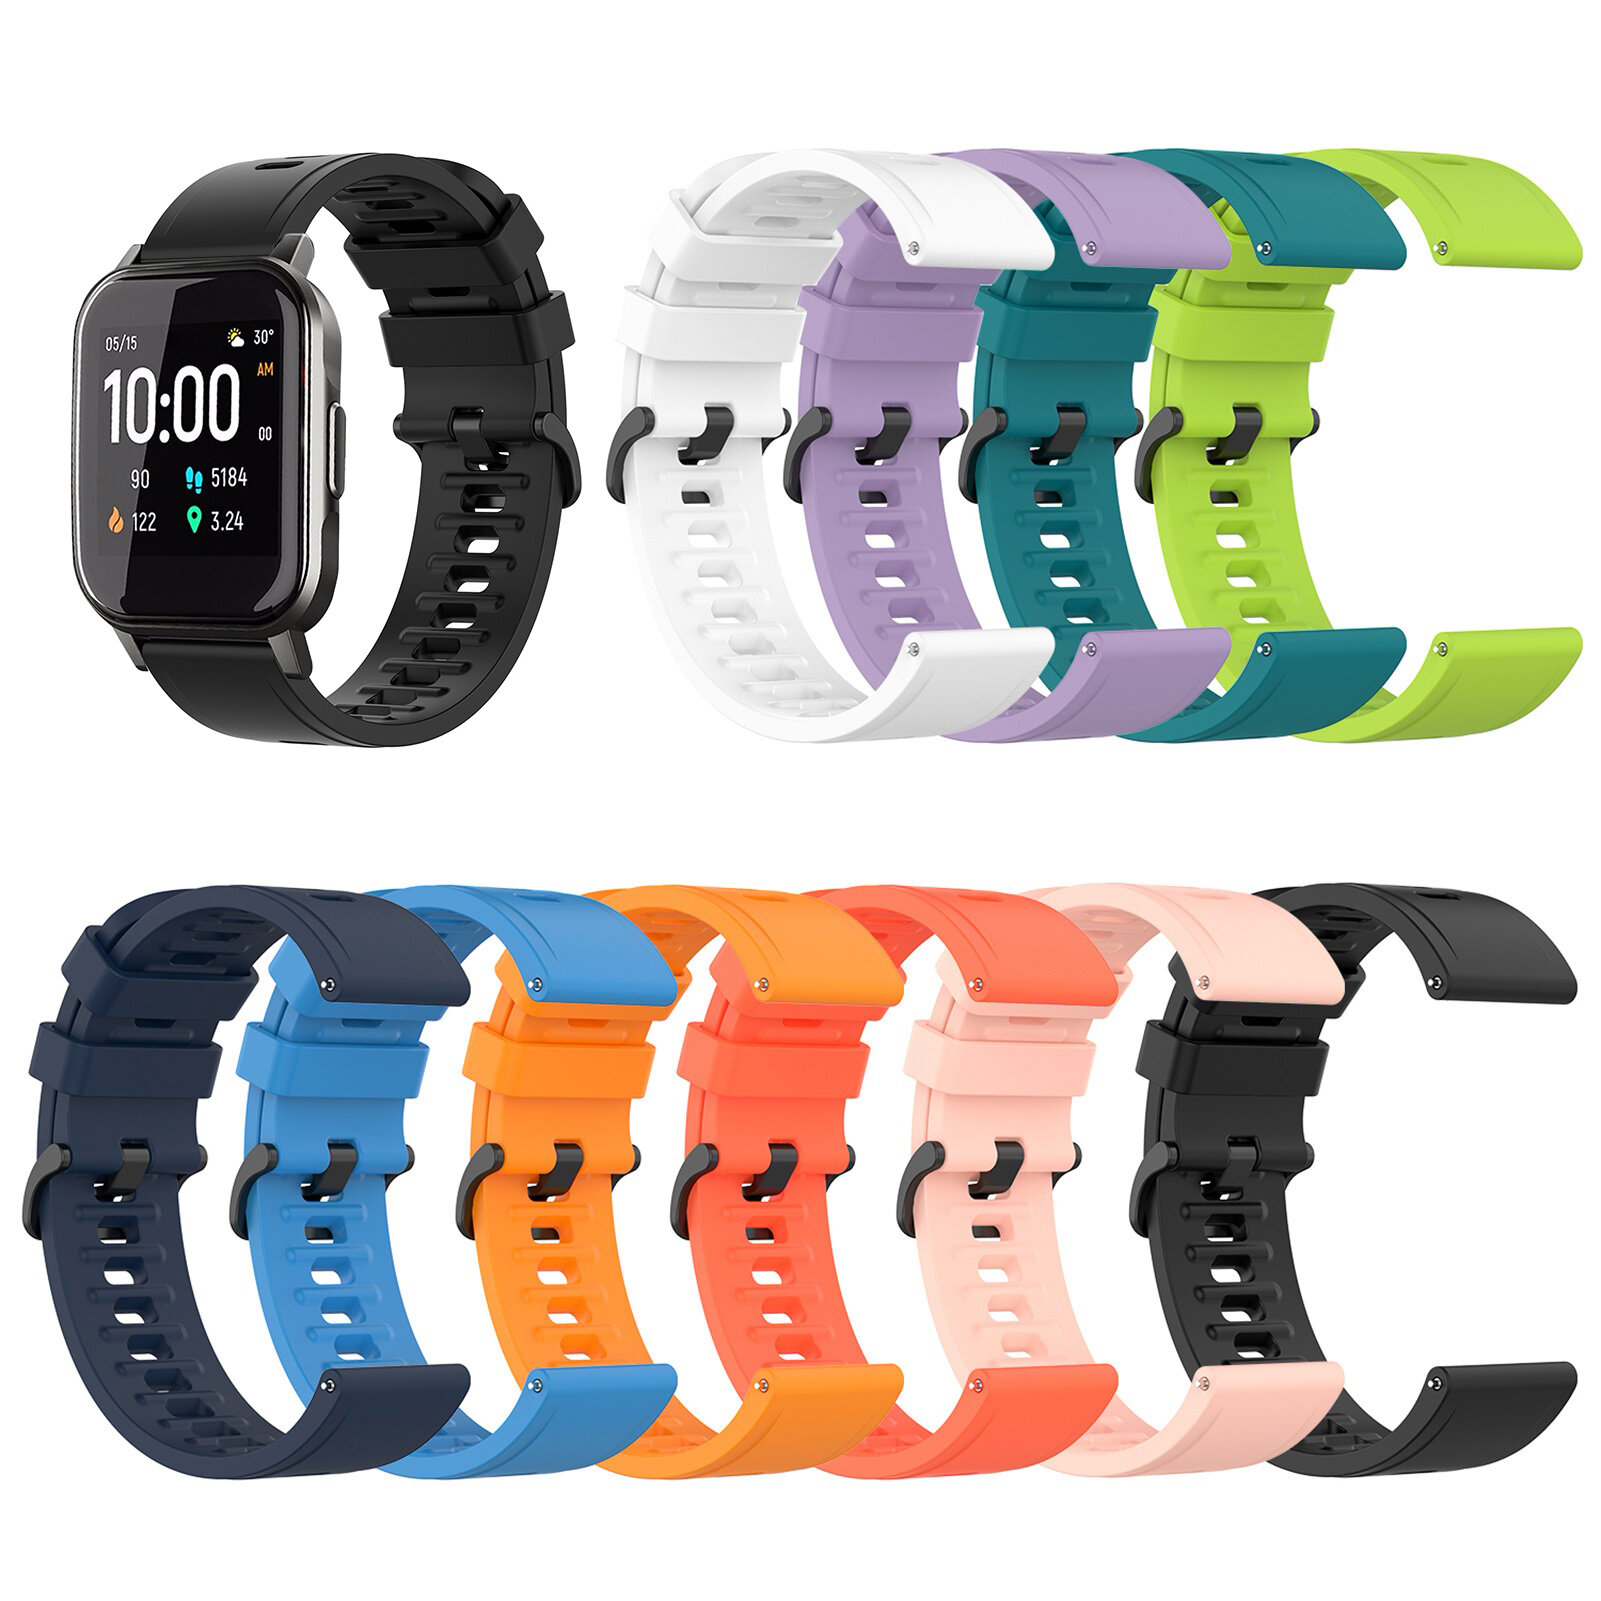 Bakeey 20mm Multi-color Silicone Smart Watch Band Replacement Strap For Zeblaze GTR...